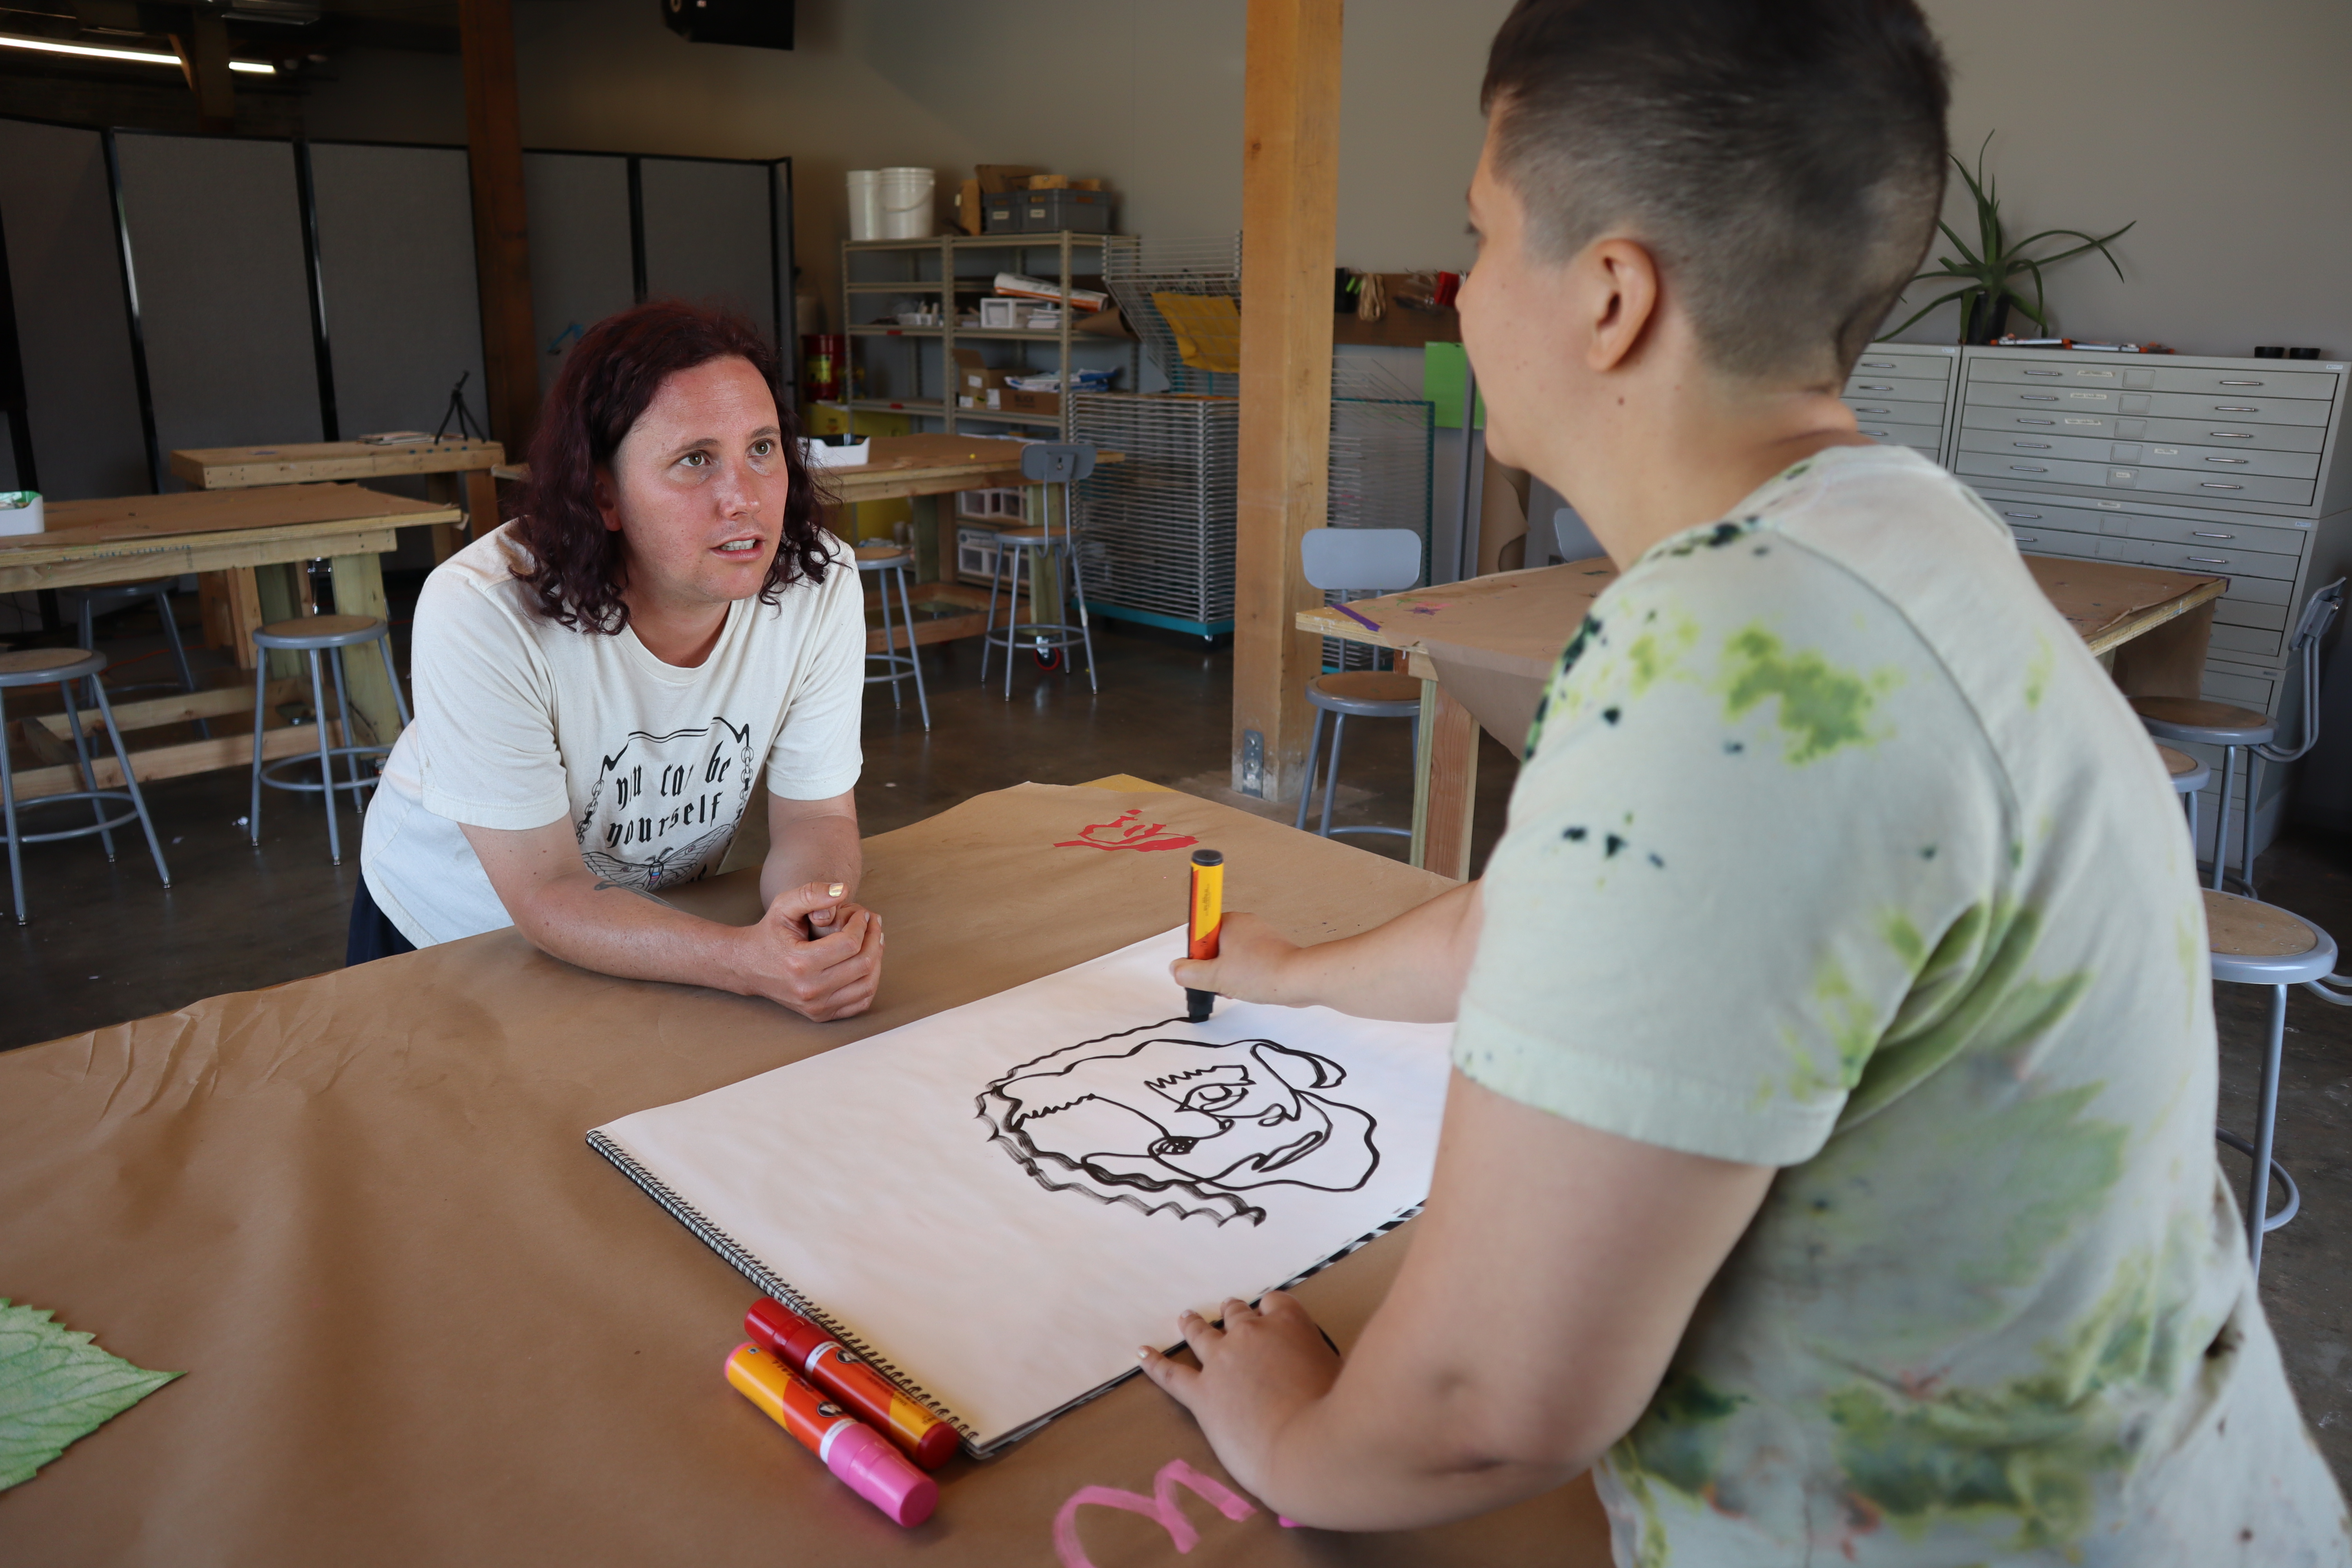 Two people stand on opposite sides of a table. We are looking over the shoulder of one as they draw a portrait of the person across from them in black marker on a large white piece of paper. The person being drawn is looking up.